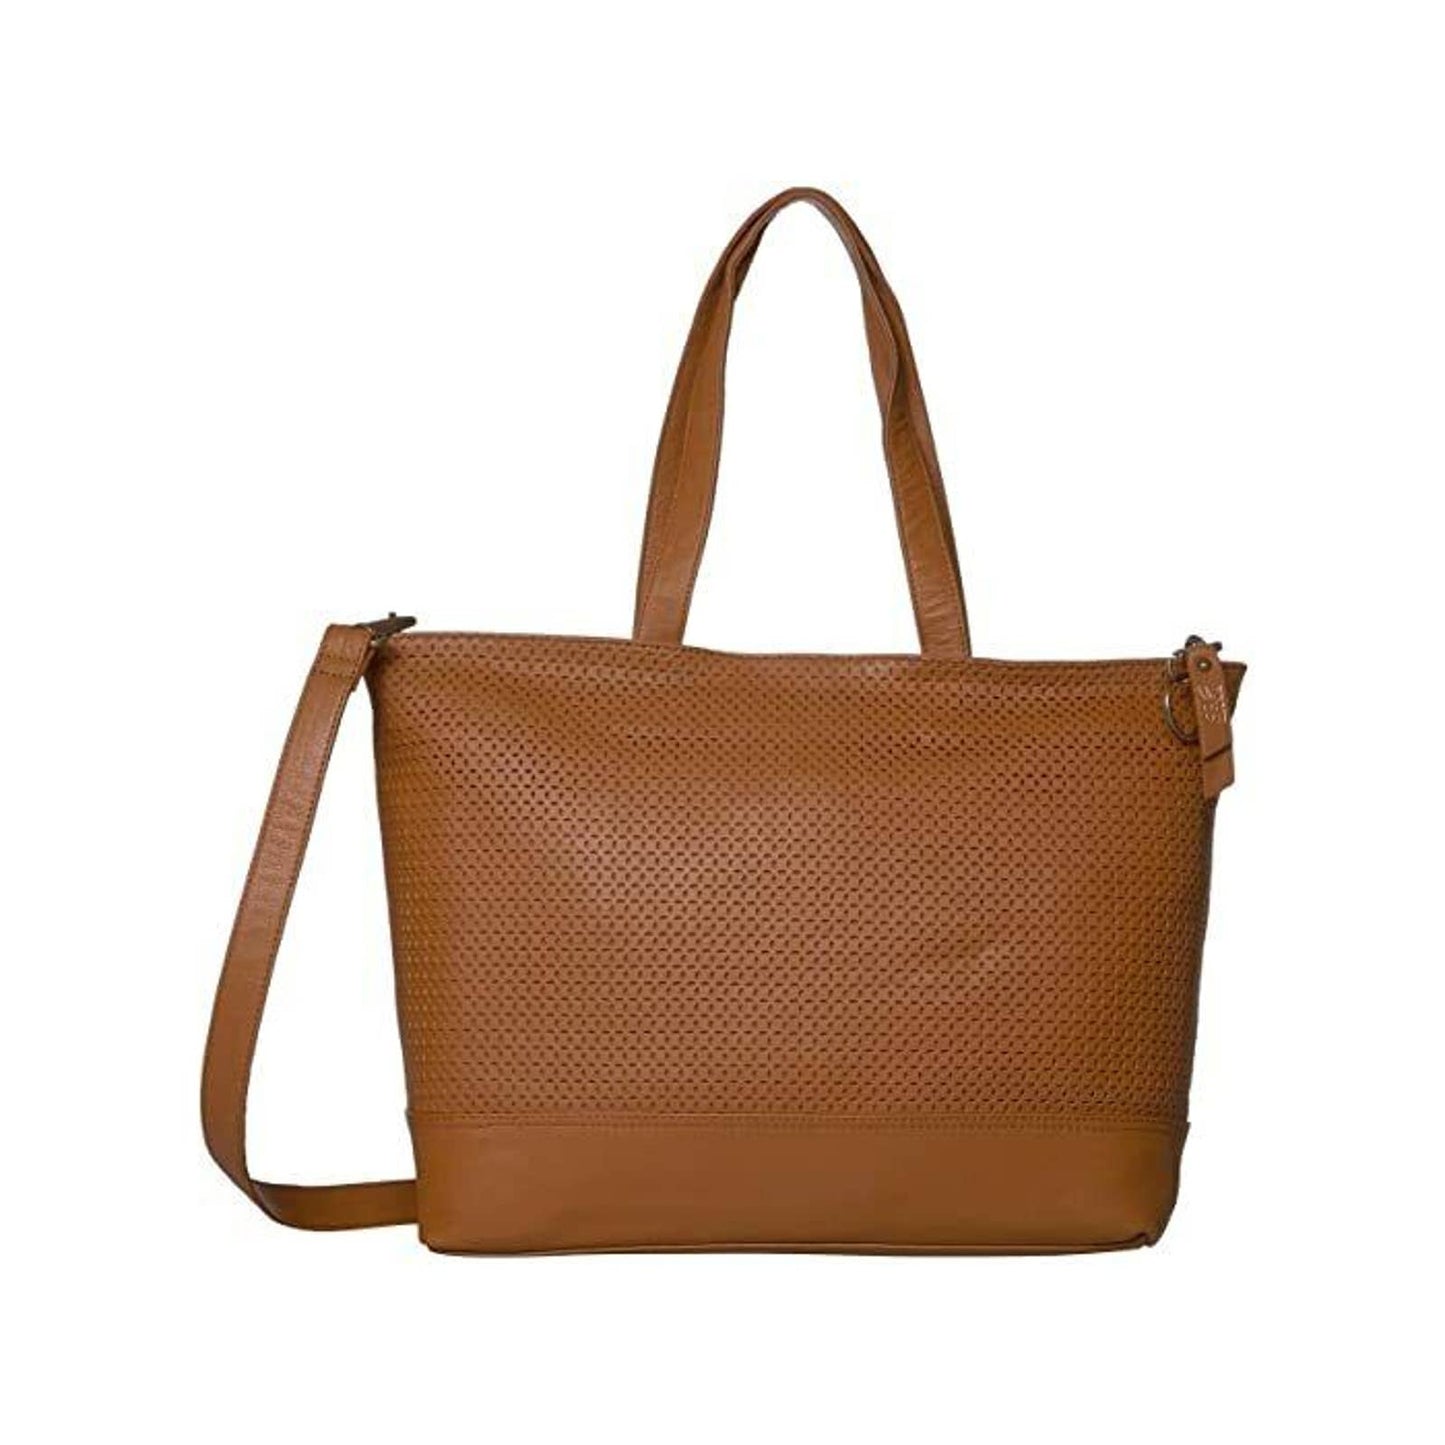 FRYE ANISE TOTE COGNAC LEATHER ANTIQUE BRASS HARDWARE